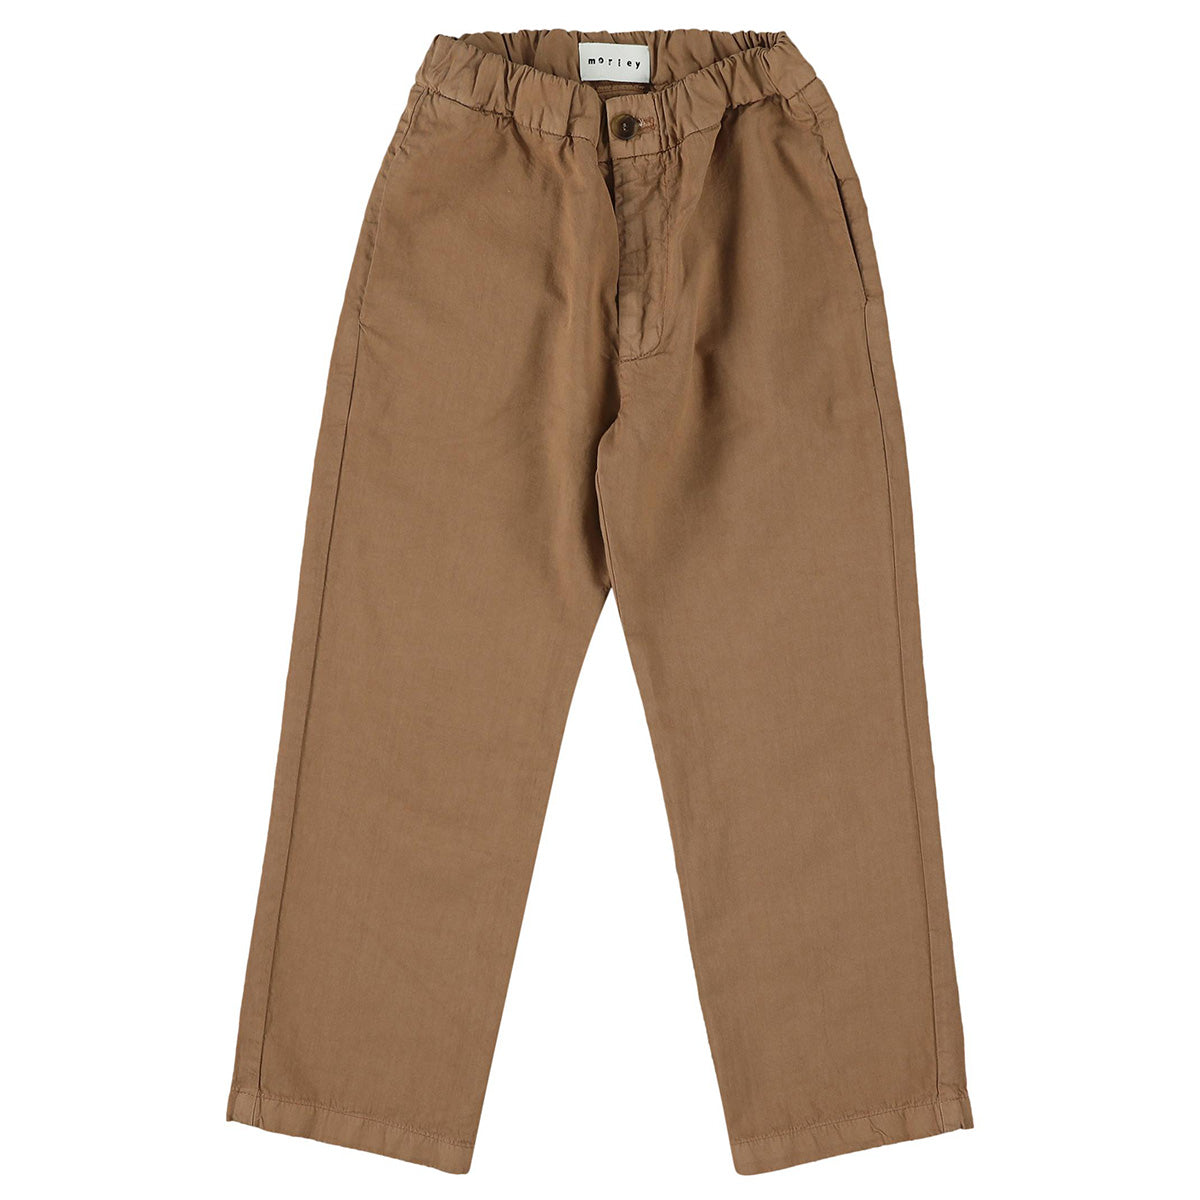 The Ultima Pants from Morley. Loose-fitting pants with an elastic waistband. Fits to size. 